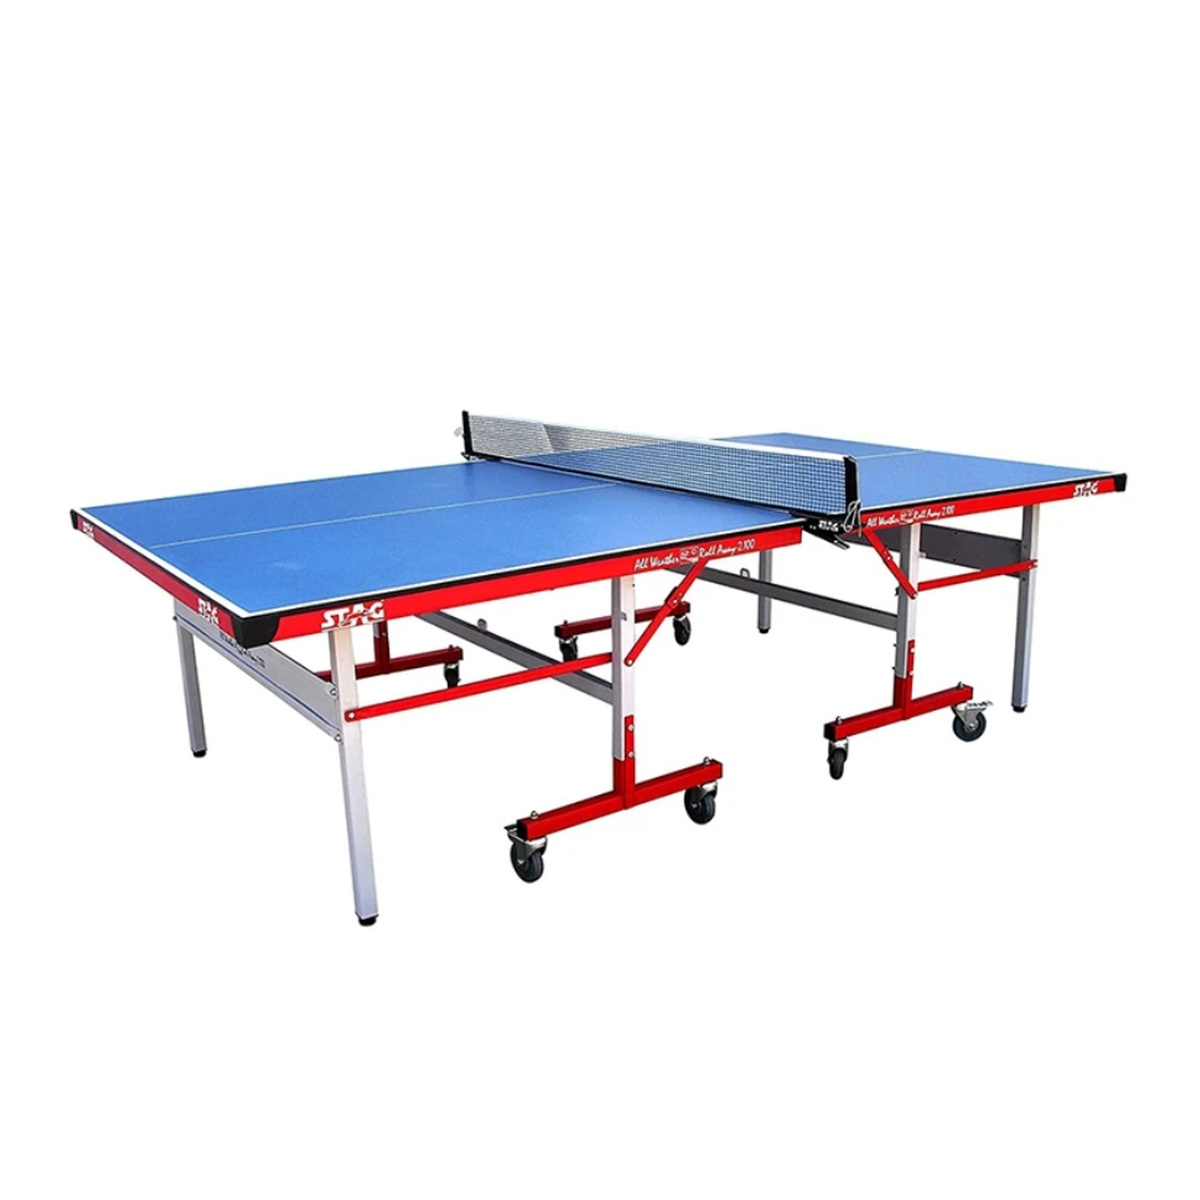 Stag Outdoor Rollaway Table Tennis Table with Compreg Top, 12 mm, Blue/Red, TTOU-40